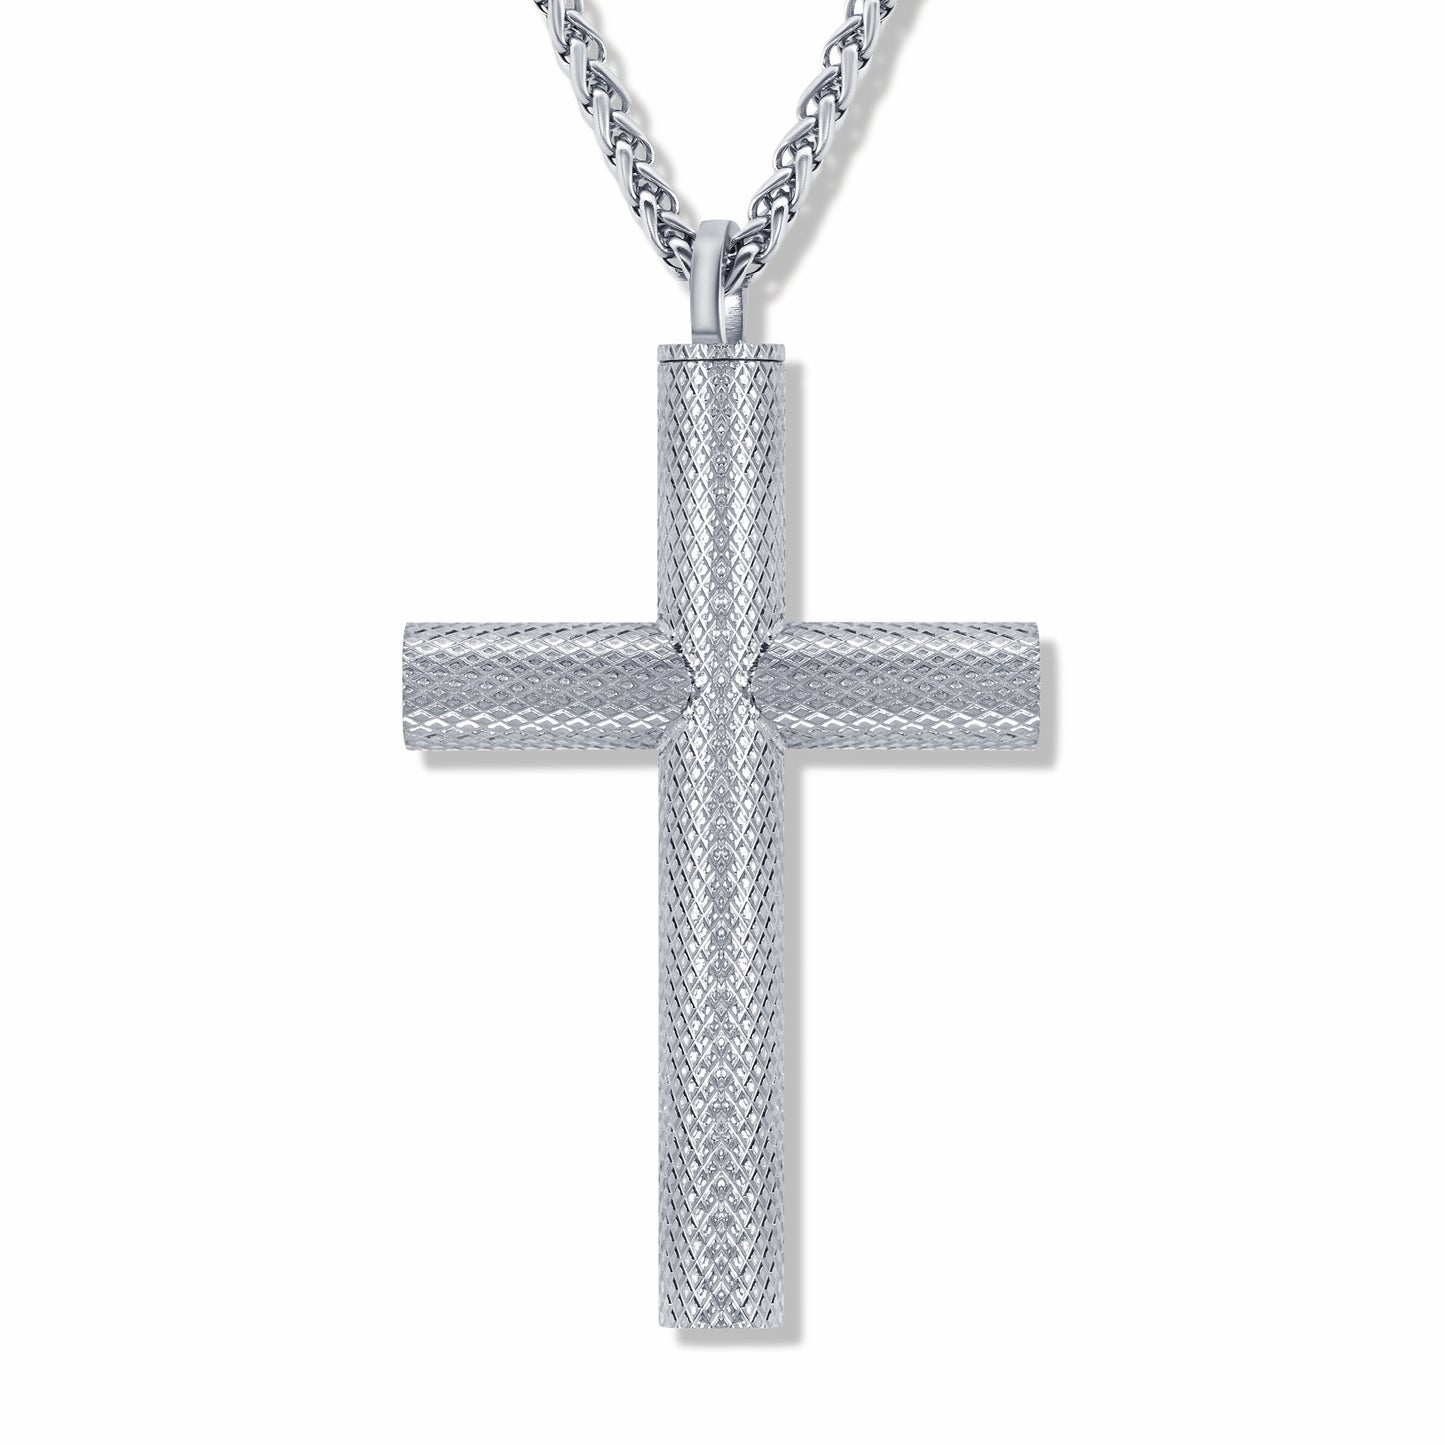 Bison Cross Silver Self-fill Pendant with 3mm Spiga Silver chain on white background